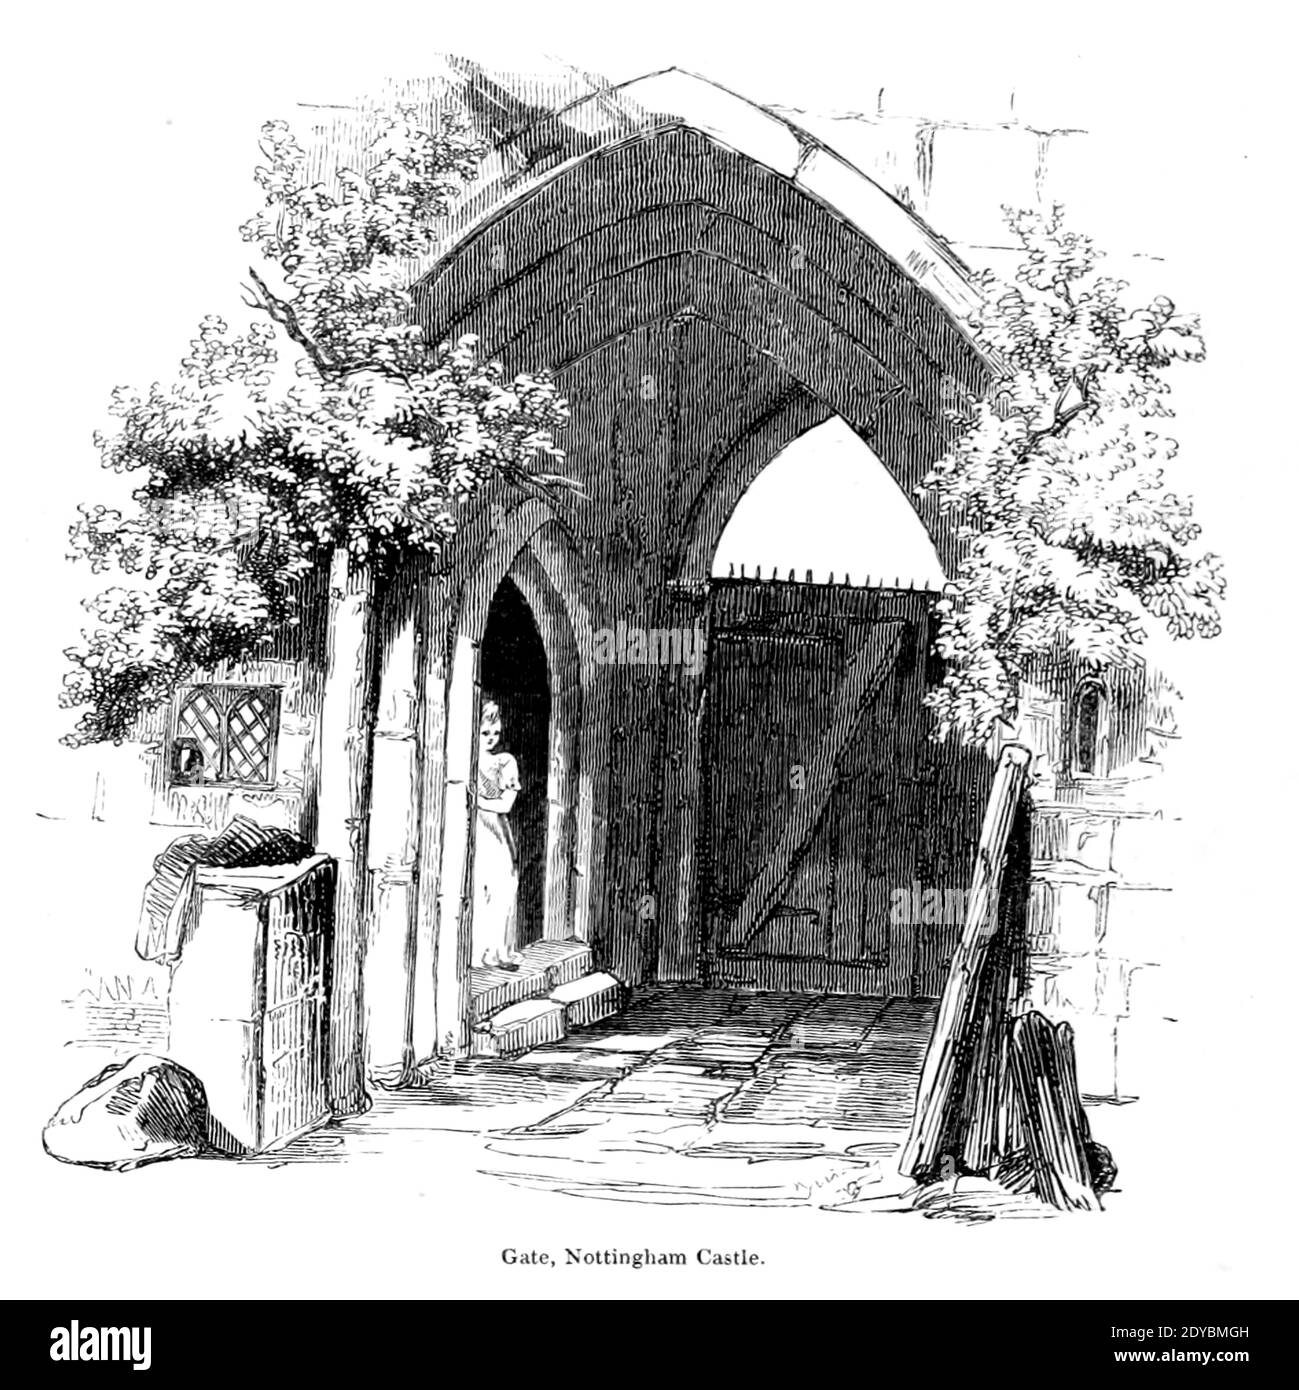 Gate, Nottingham Castle From the book The wanderings of a pen and pencil by Palmer, F. P. (Francis Paul); Illustrated by Crowquill, Alfred, [Alfred Henry Forrester]  Published in London by Jeremiah How in 1846 Stock Photo